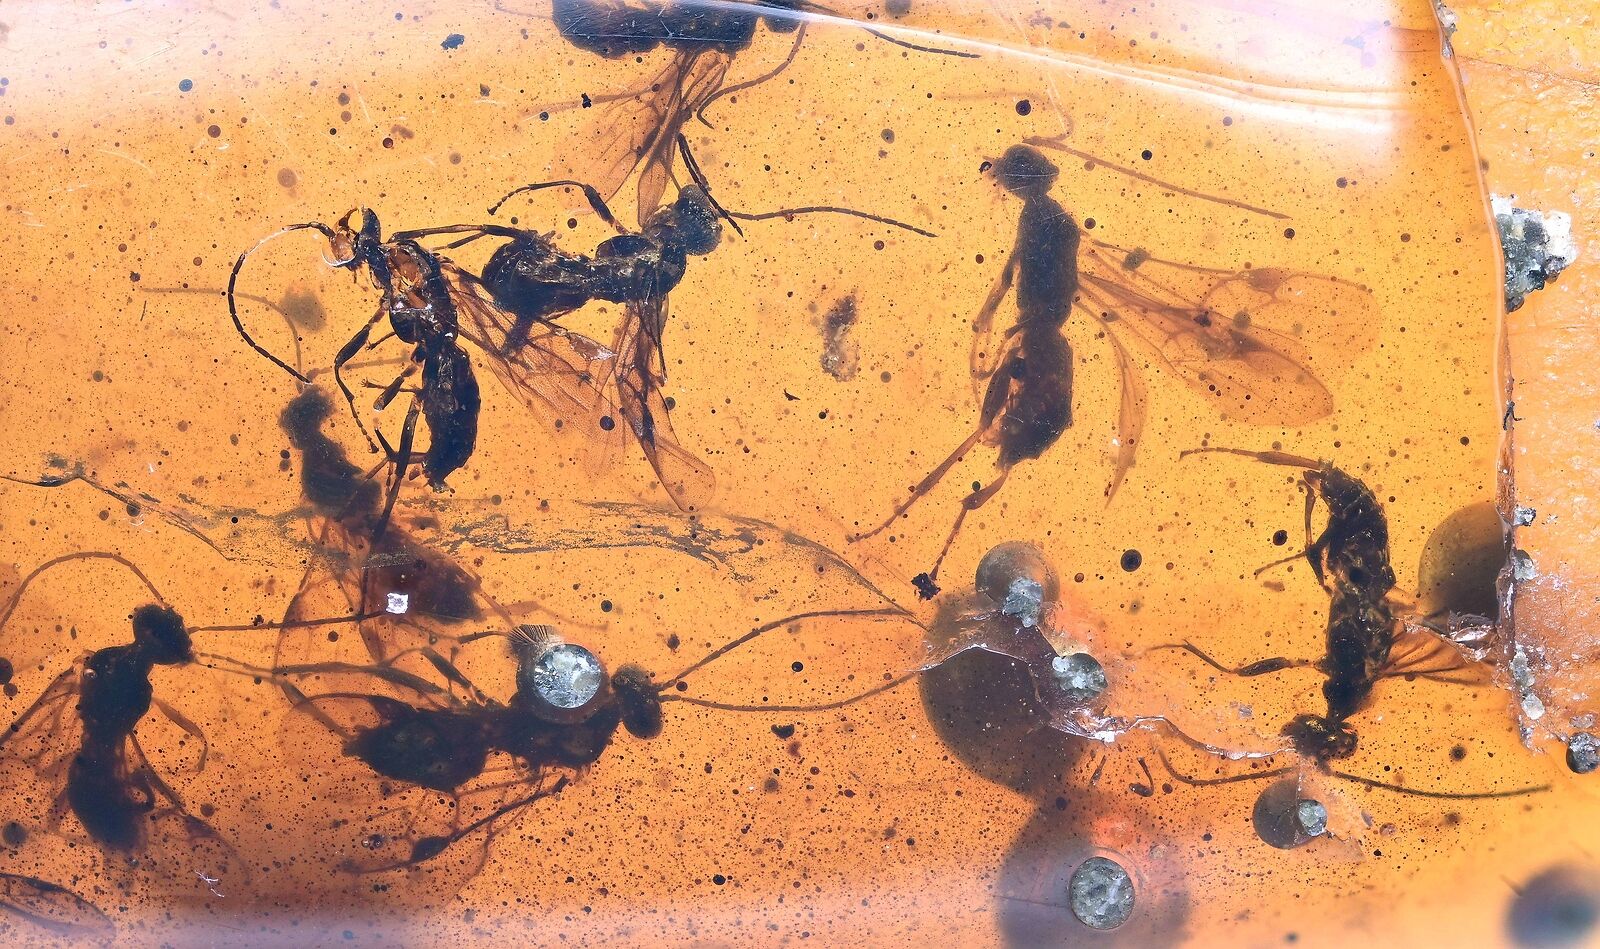 Large swarm of Hymenoptera (Wasps), Fossil Inclusion in Burmese Amber